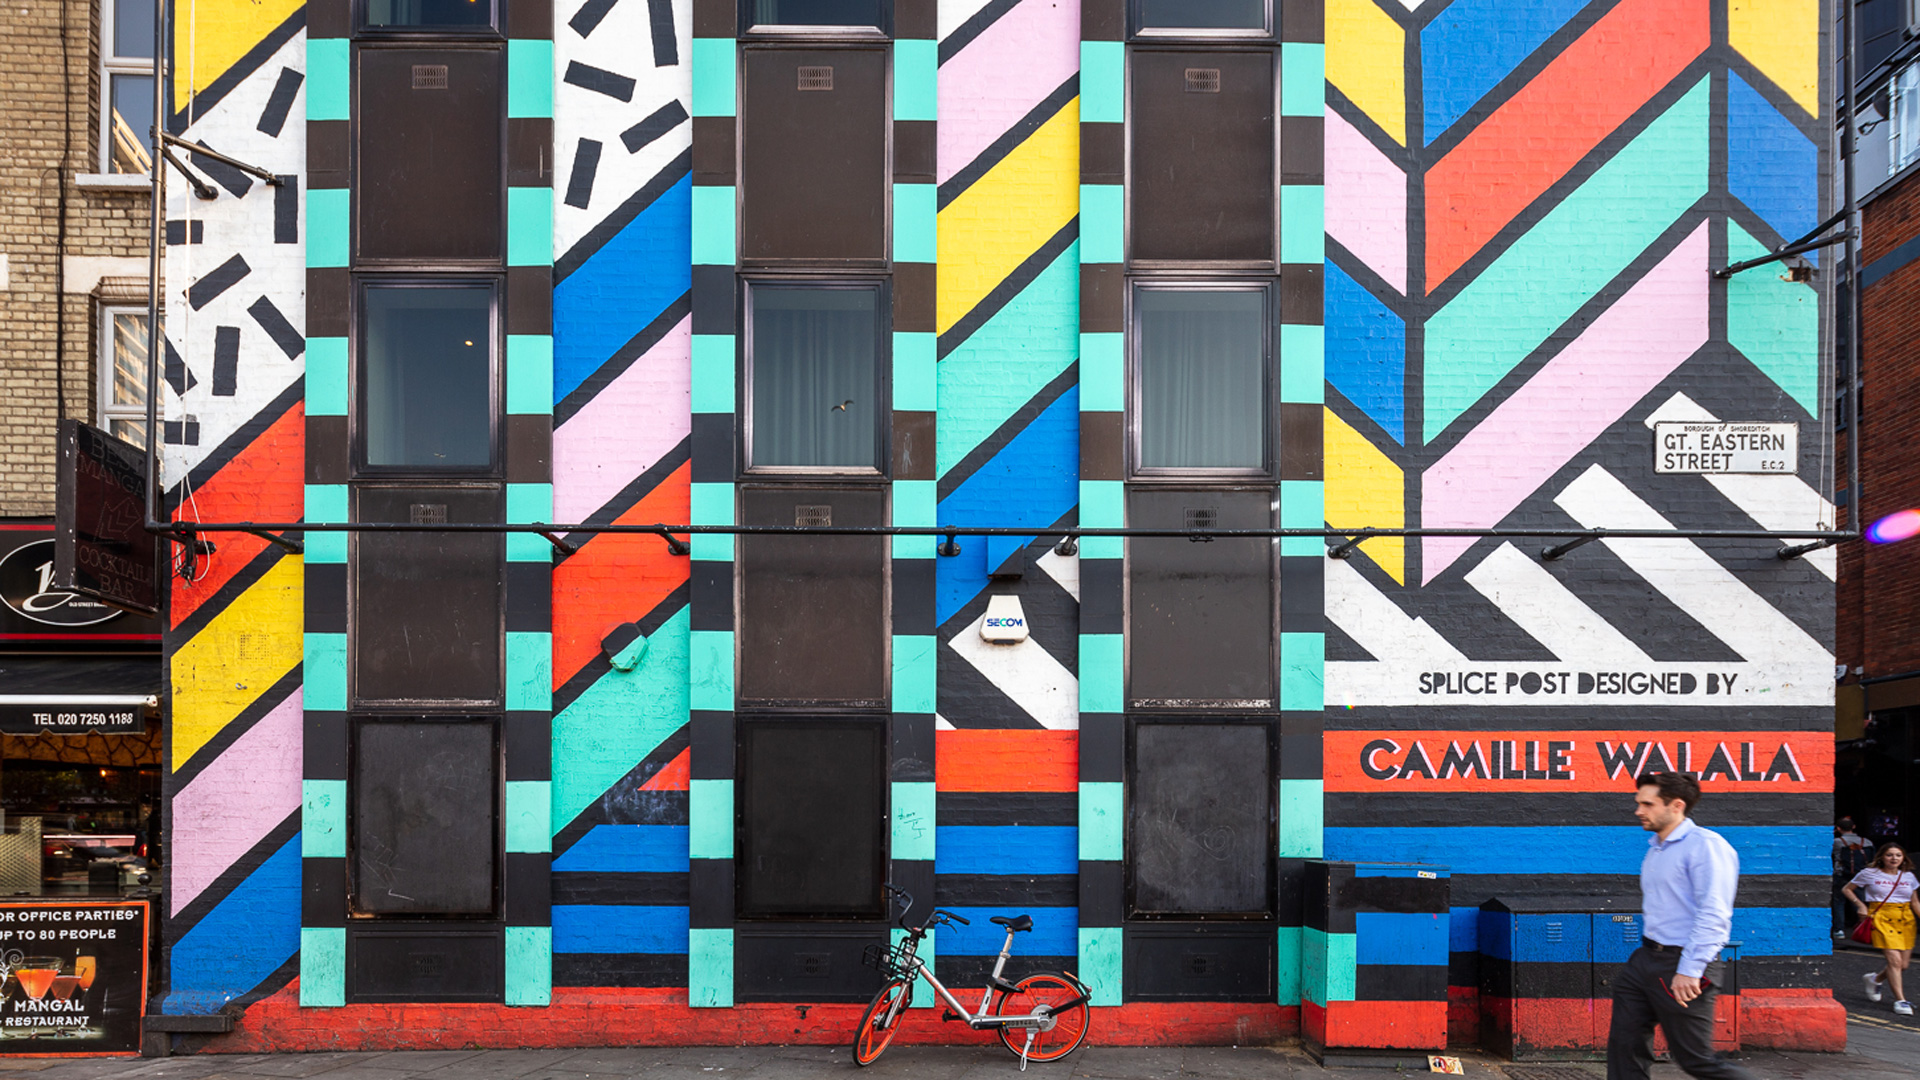 Man walking past the facade of a building painted with vibrant colours by an artist Camille Walala whose name is written on the bottom right corner of the building 